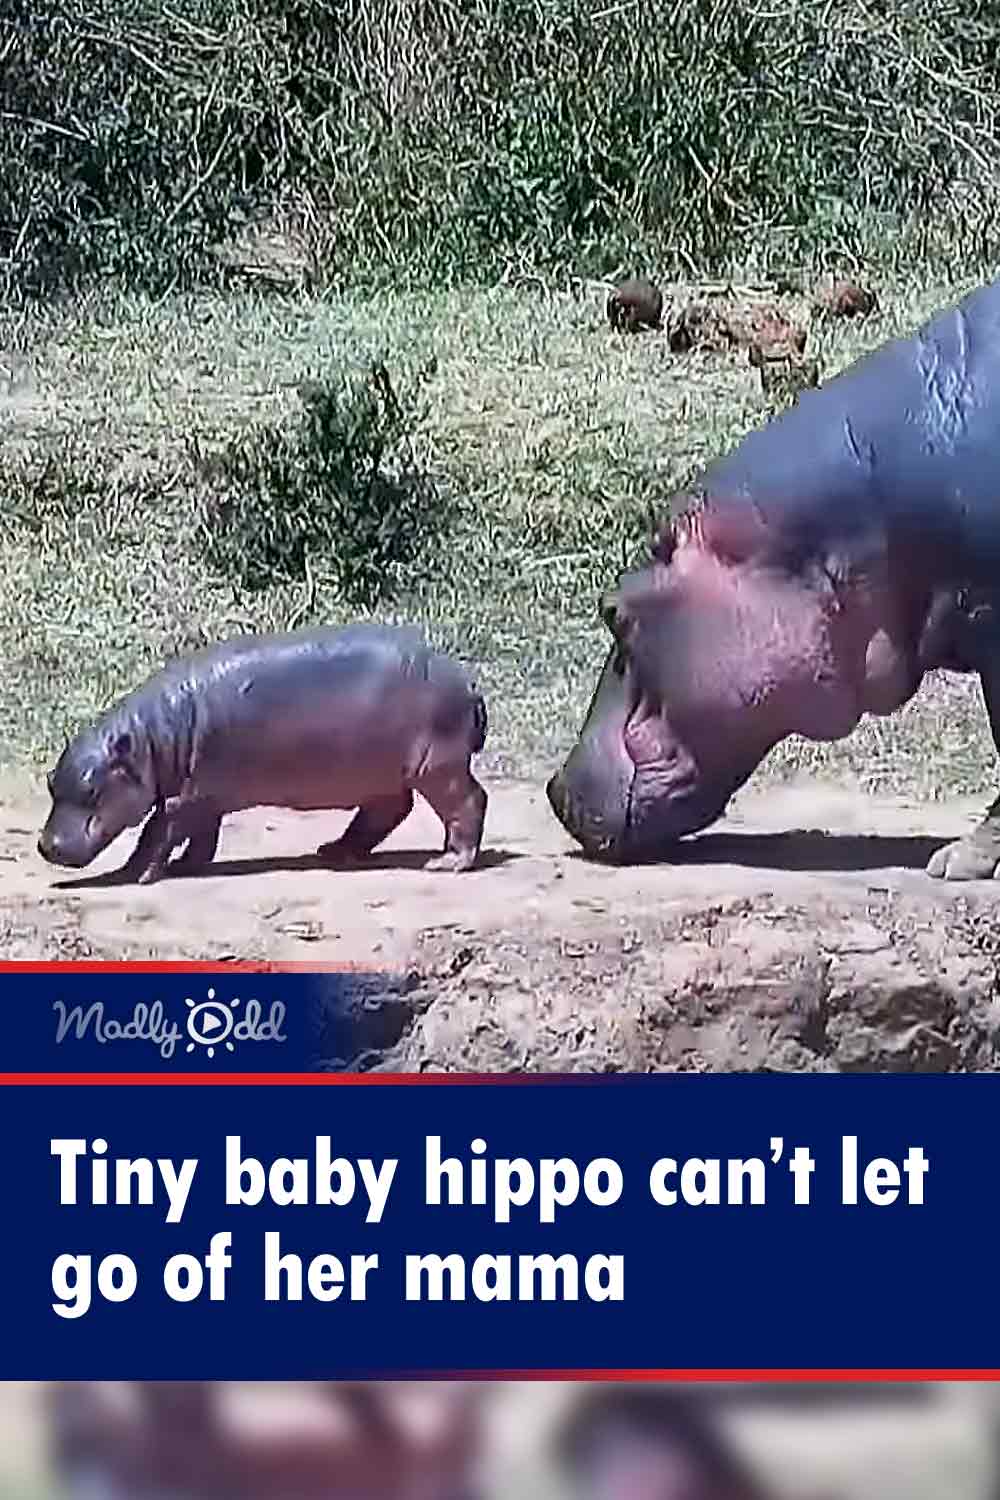 Tiny baby hippo can’t let go of her mama